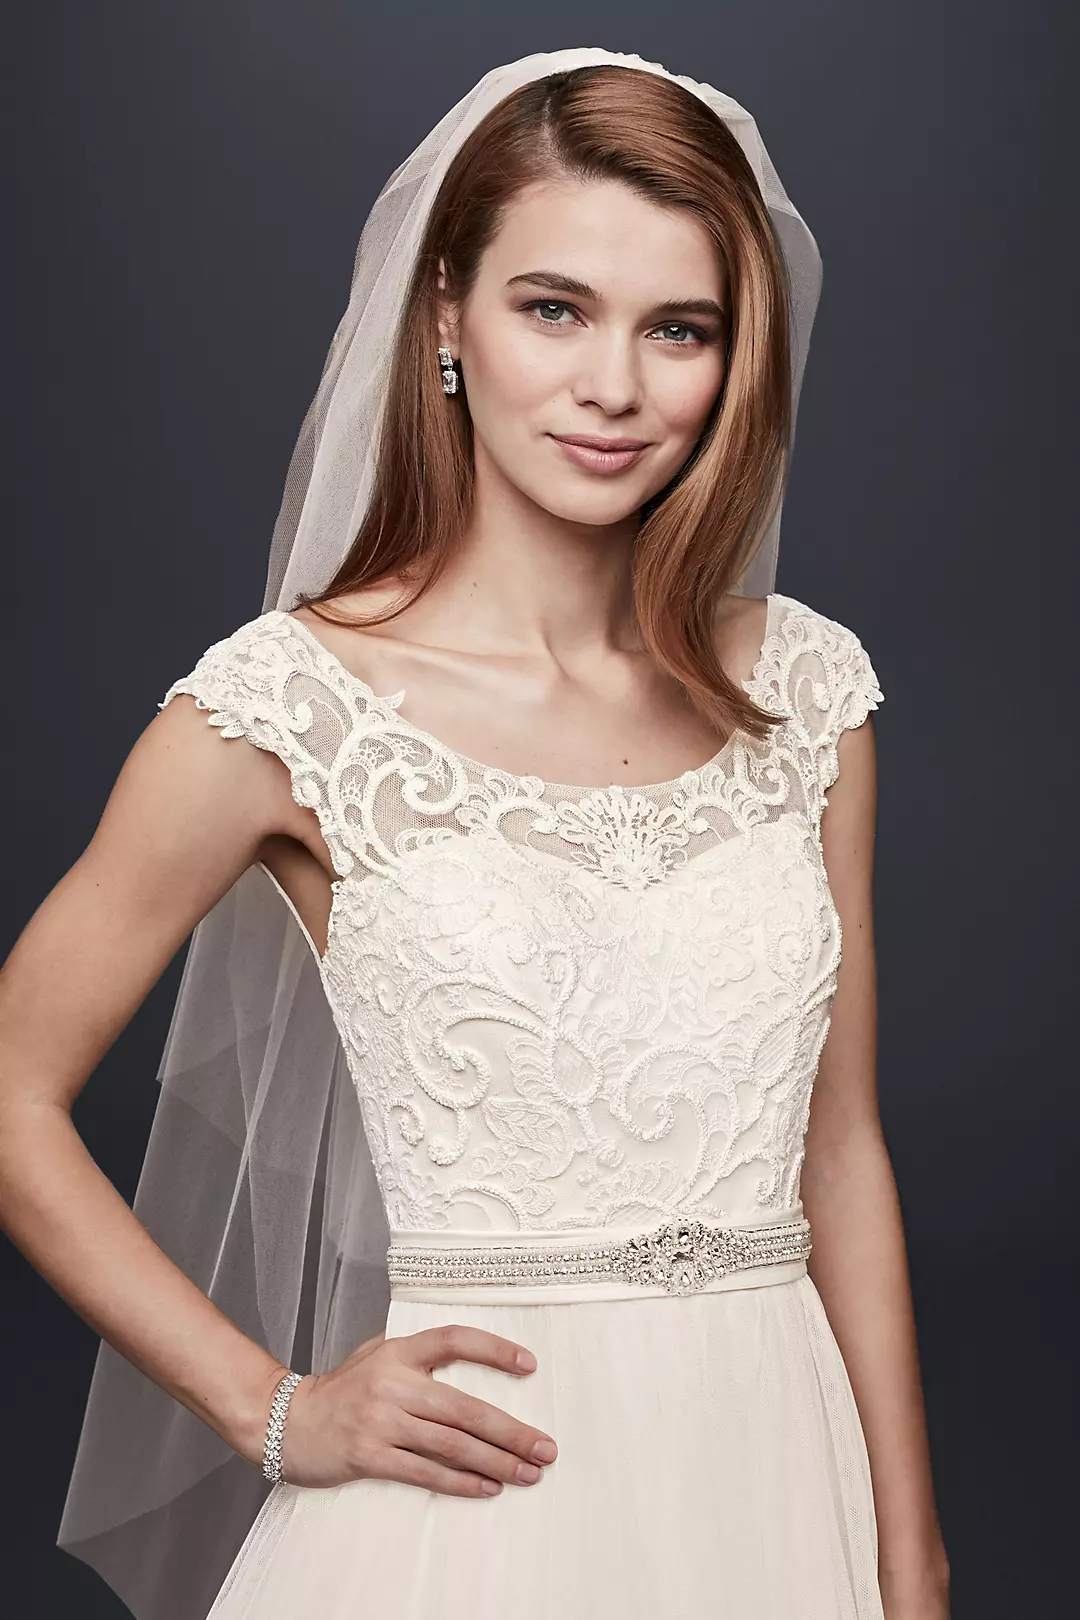 Two Tier Elbow Length Veil Image